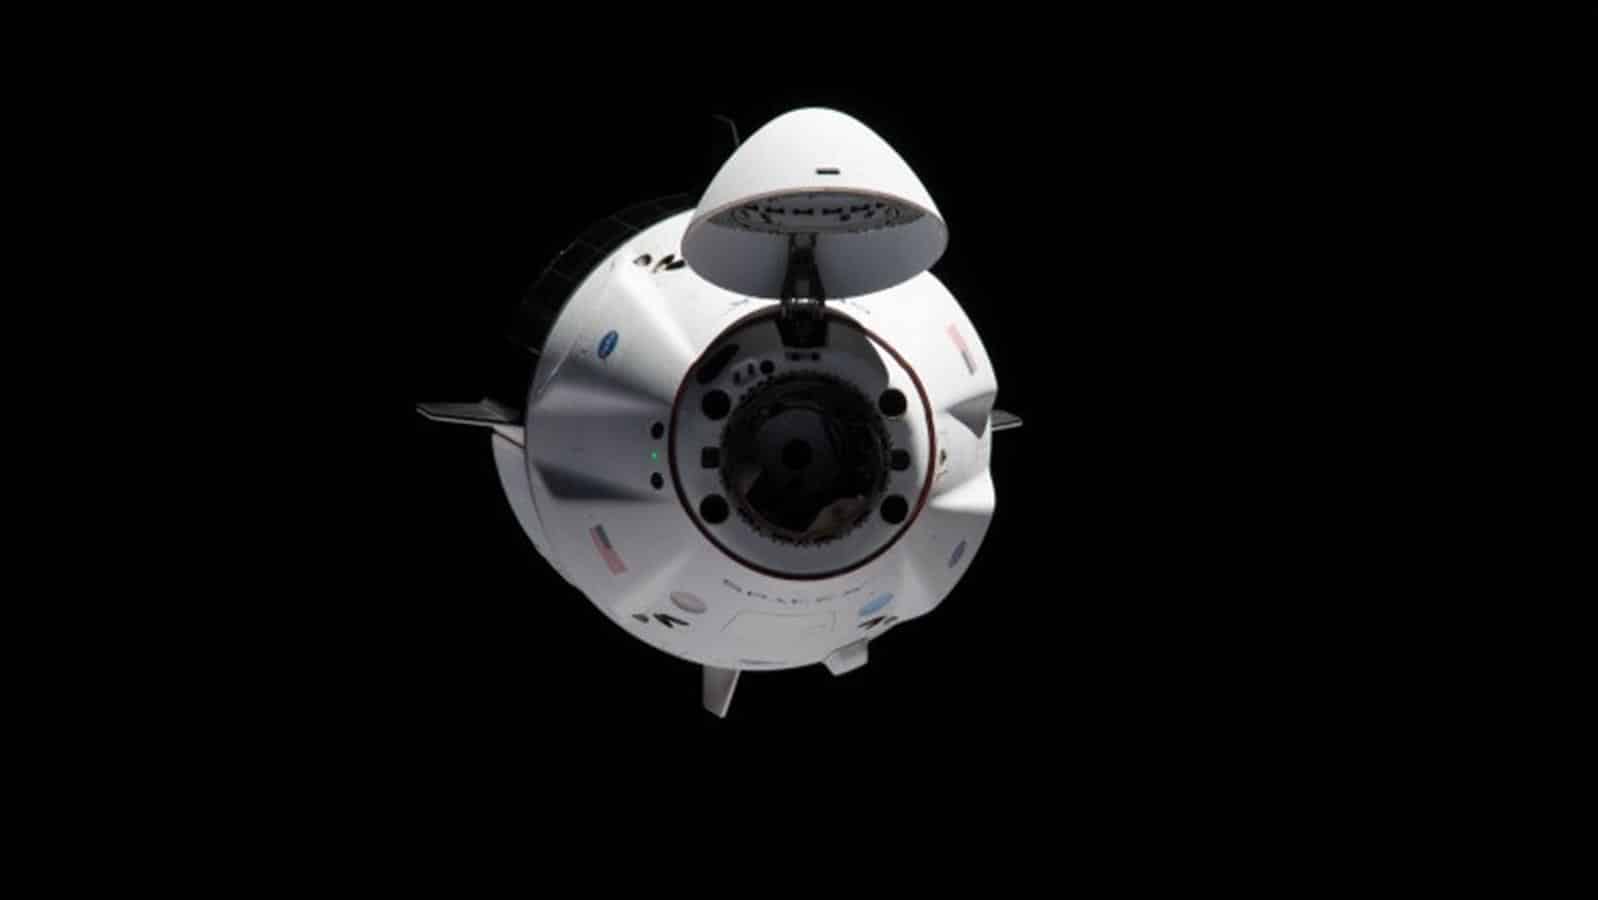 SpaceX is ending the production of Crew Dragon capsules.  What is the reason for this?